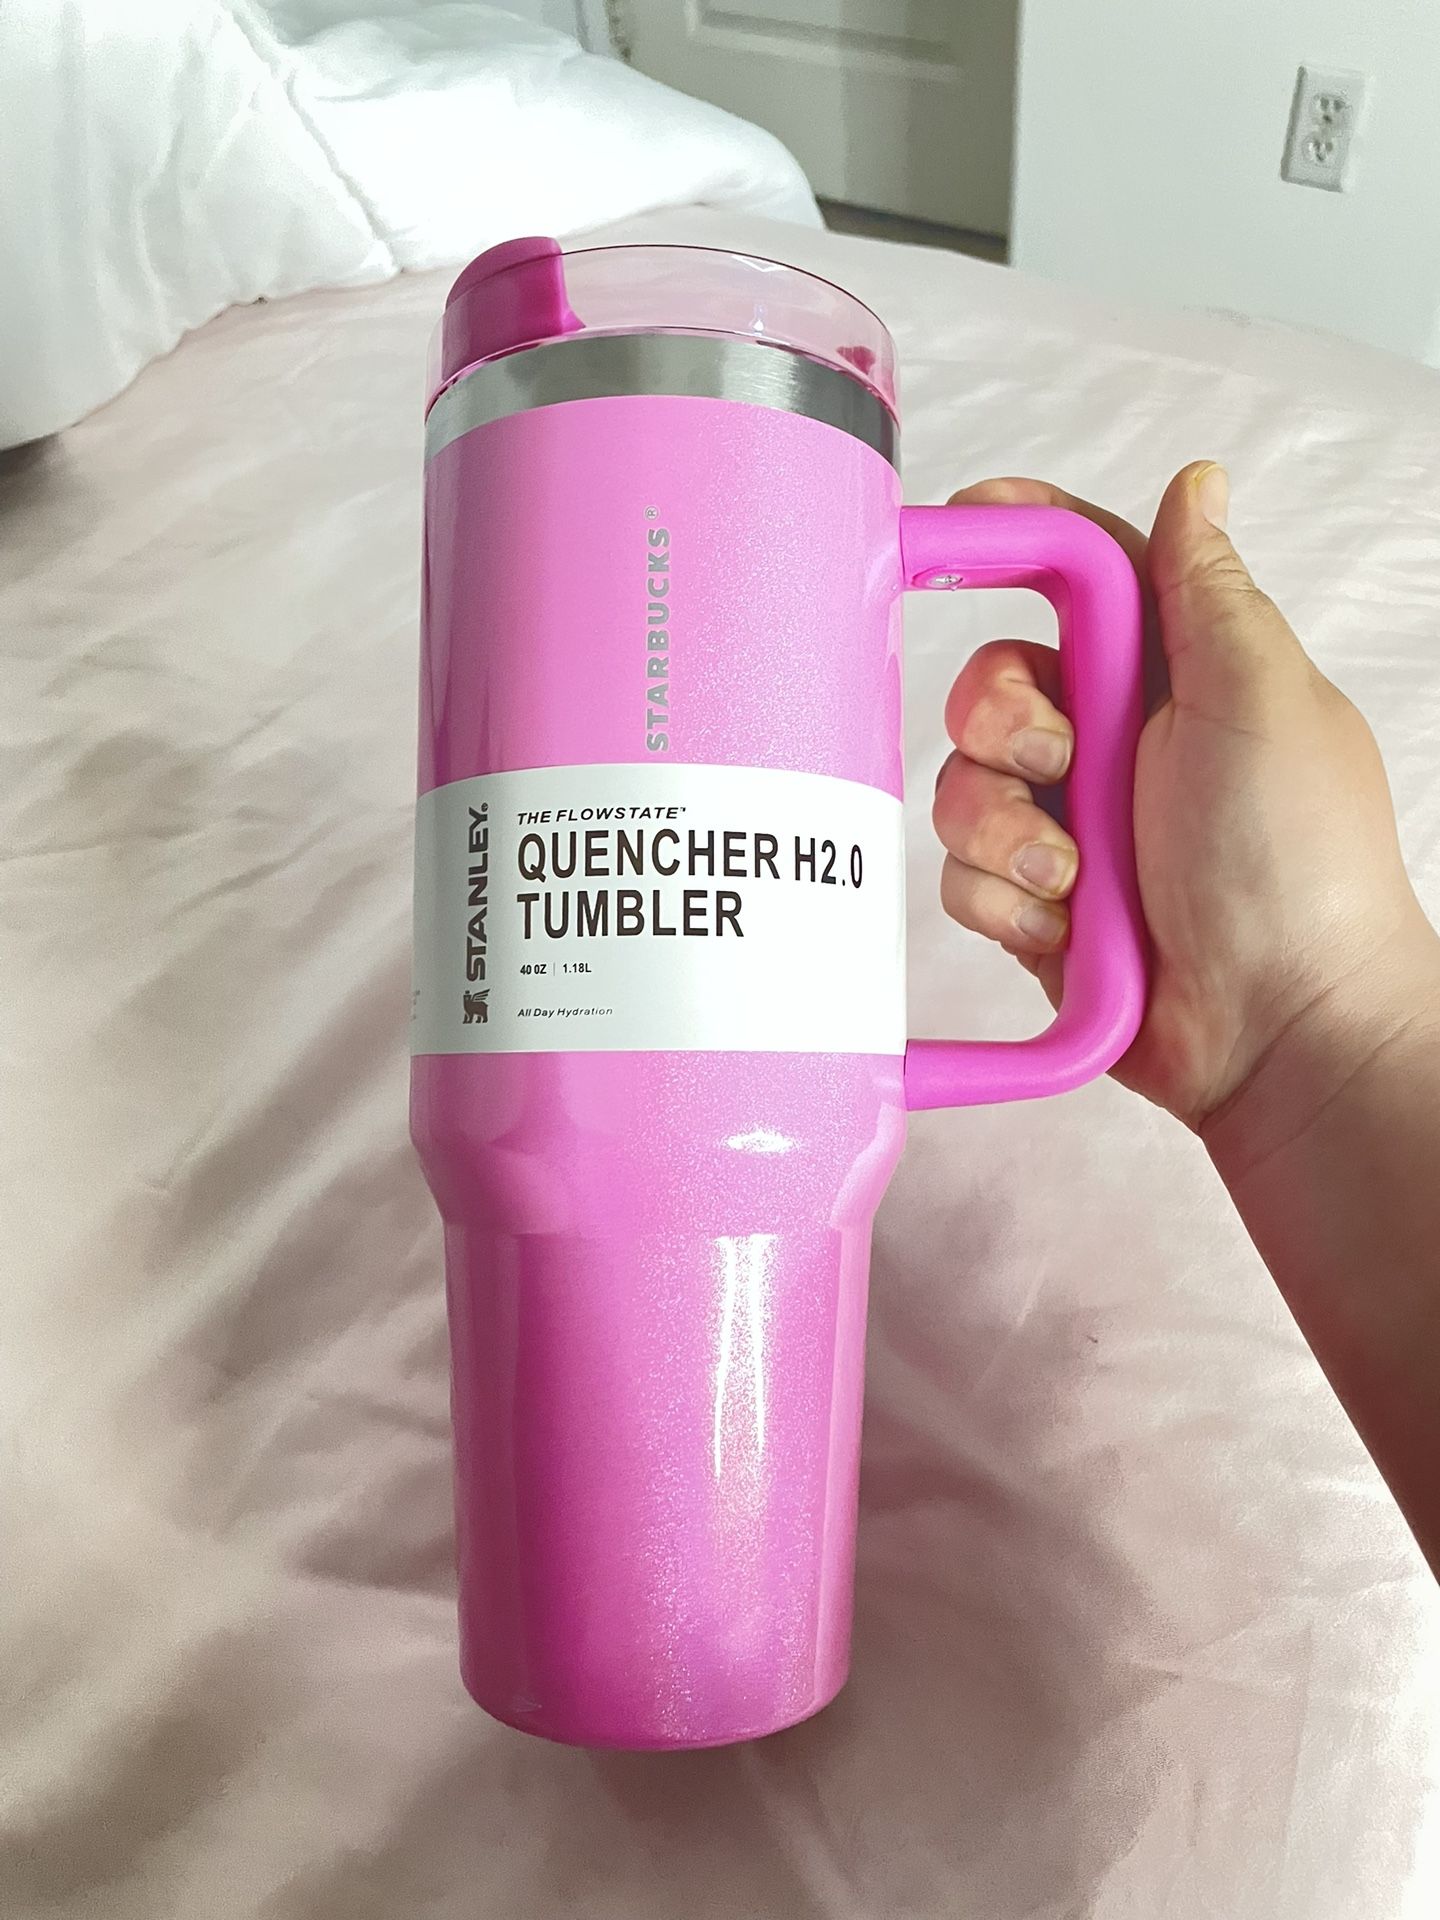 WINTER PINK STARBUCKS, LIMITED EDITION STANLEY CUP